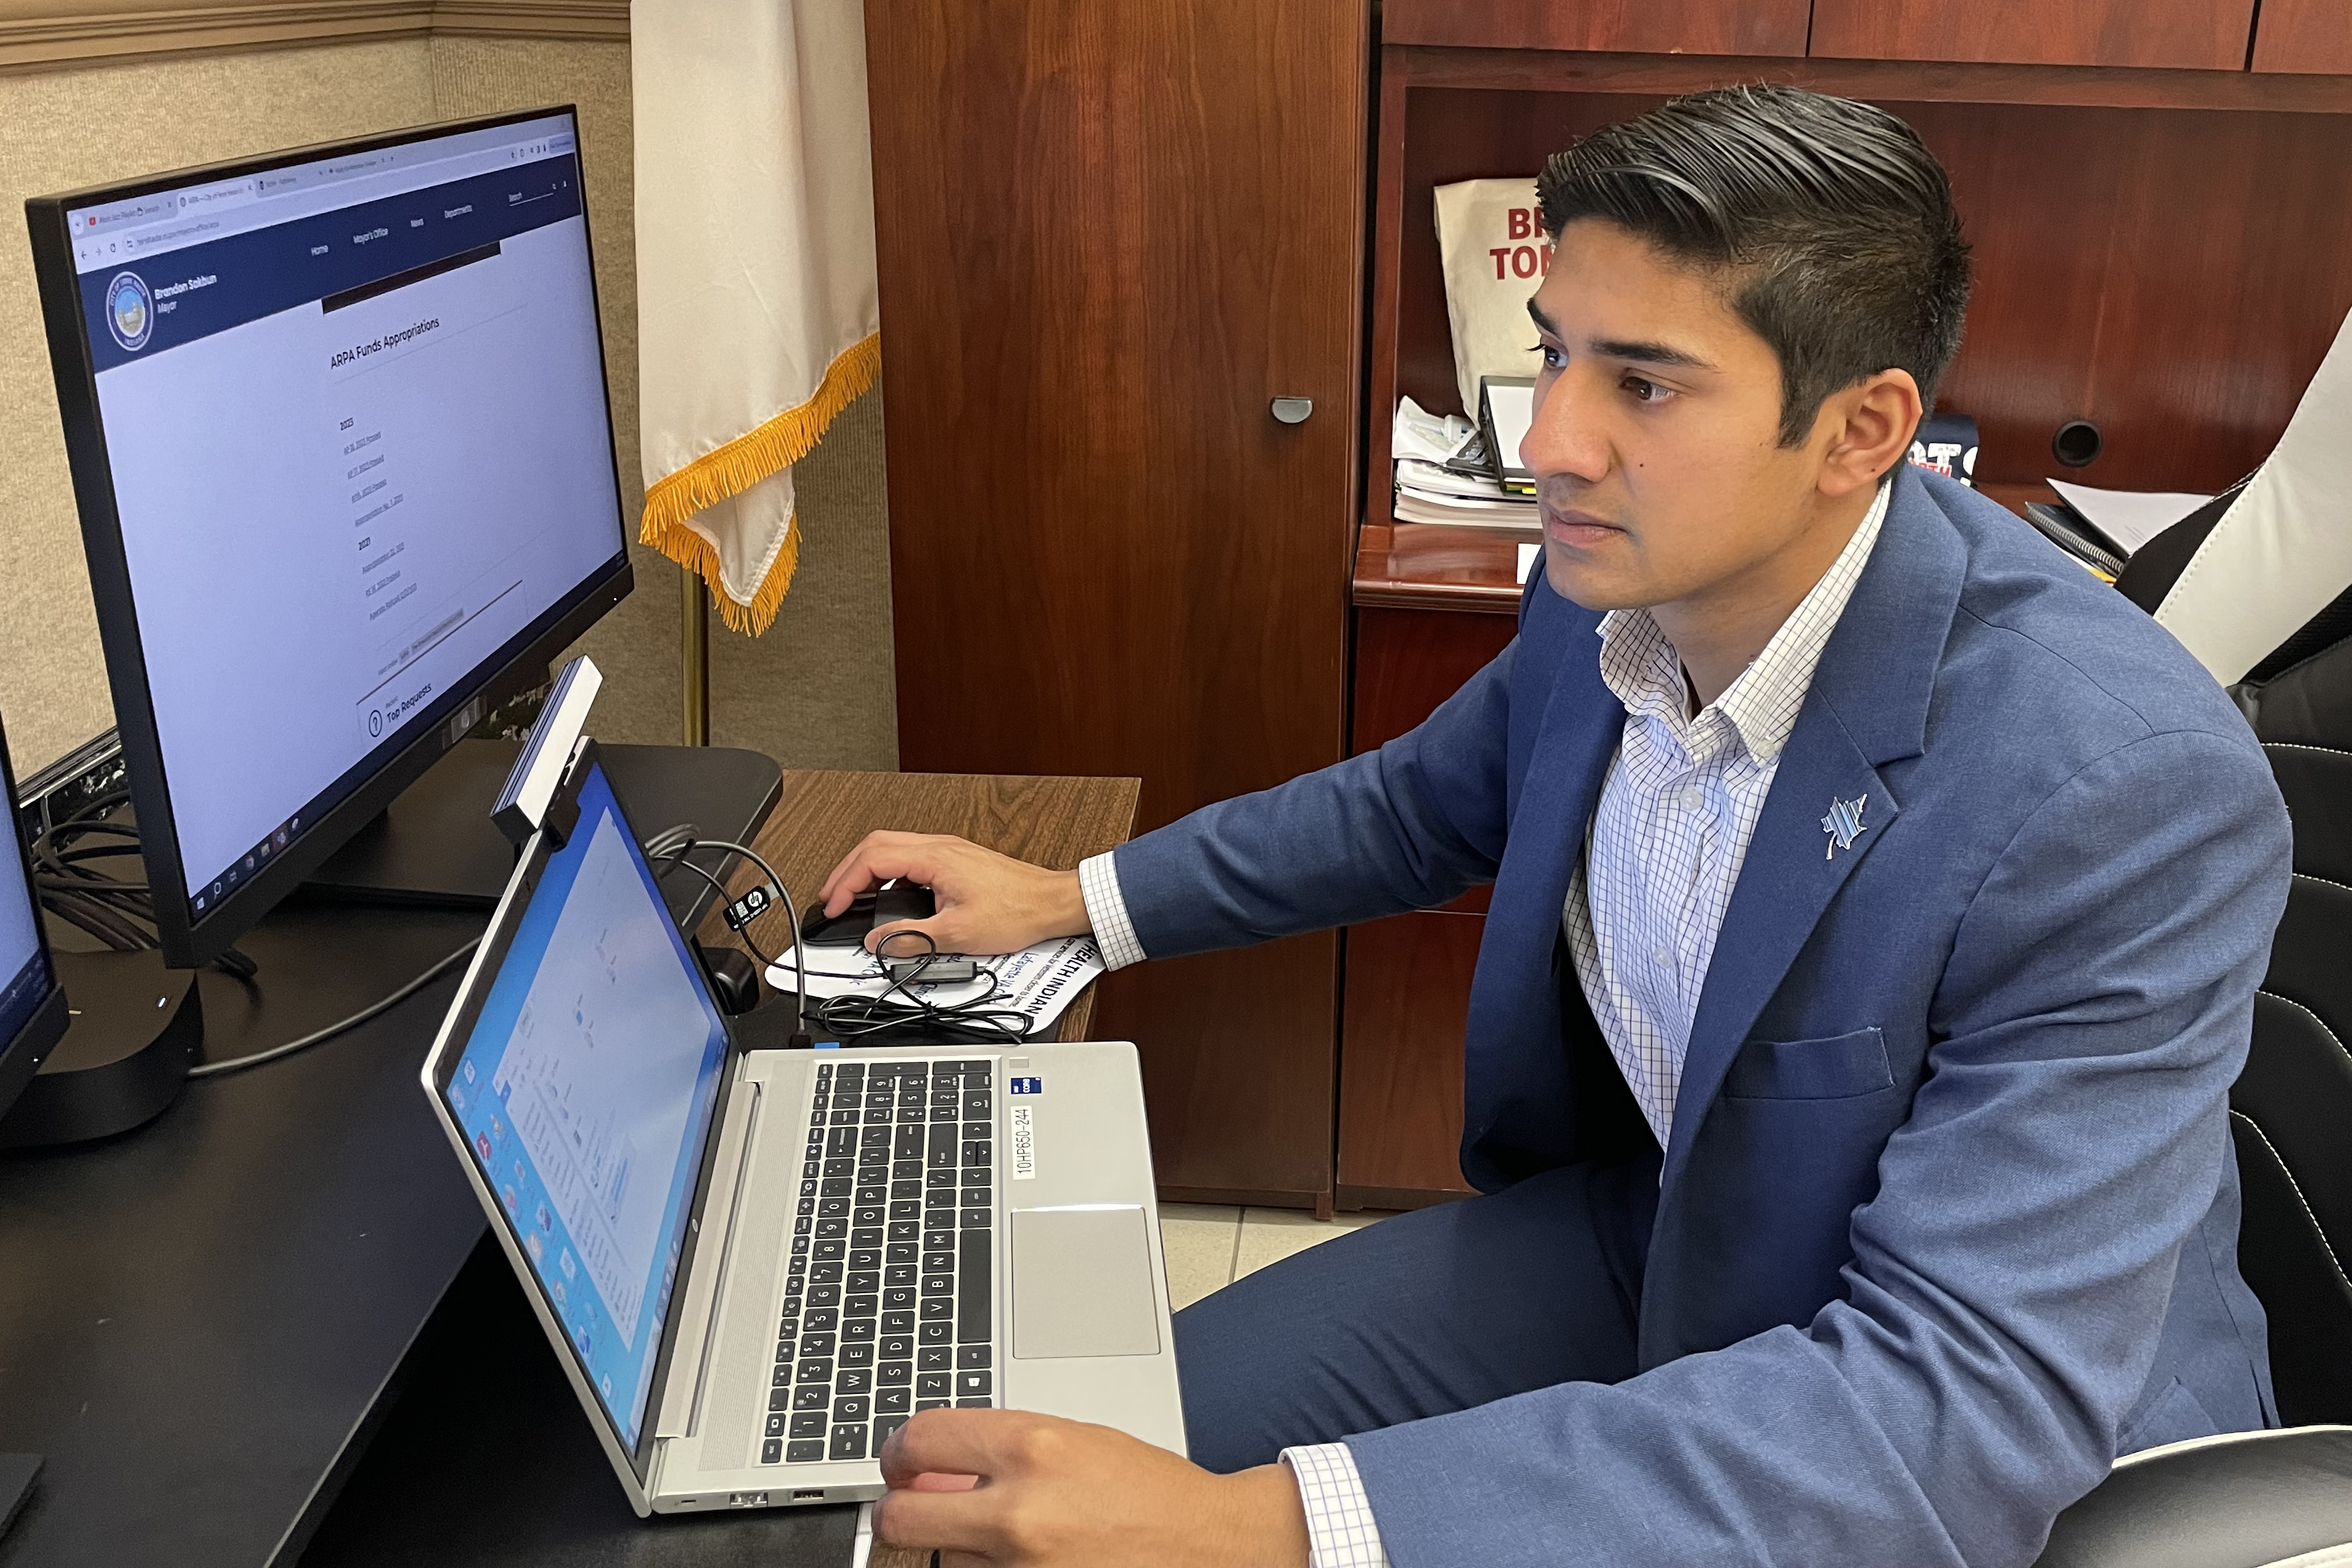 Brandon Sakbun, Terre Haute’s youngest mayor sits at a desk in front of a laptop and computer screen. He is wearing a navy suit and light blue shirt.